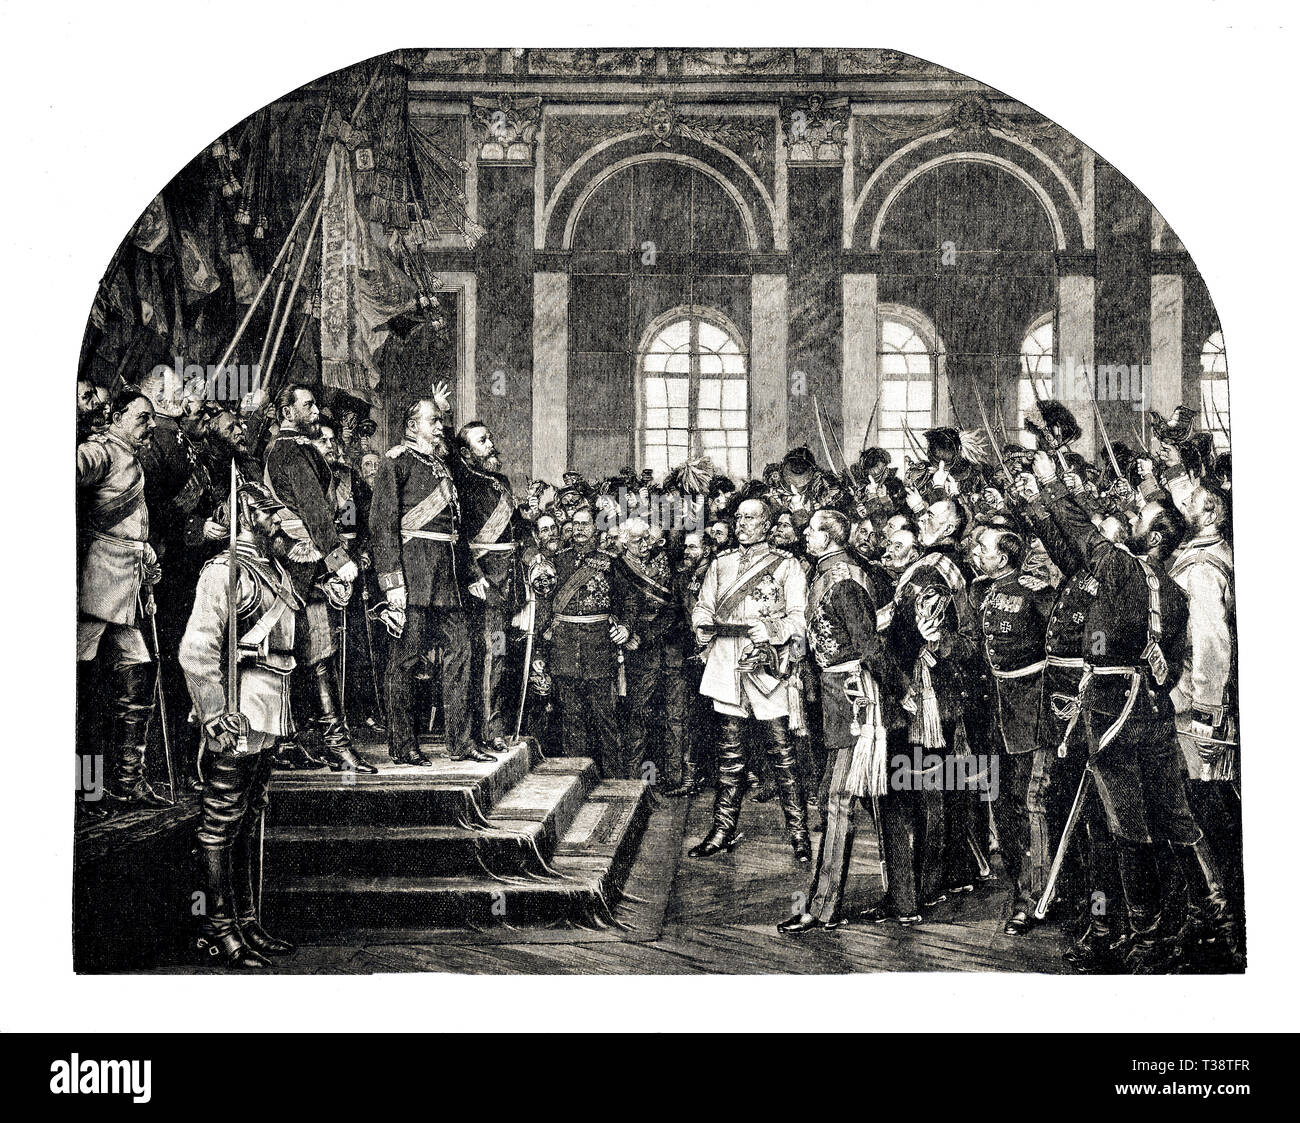 The proclamation of the German Empire in the Palace of Versailles on January 18, 1871. Werner's painting. Digital improved reproduction from Illustrated overview of the life of mankind in the 19th century, 1901 edition, Marx publishing house, St. Petersburg. Stock Photo